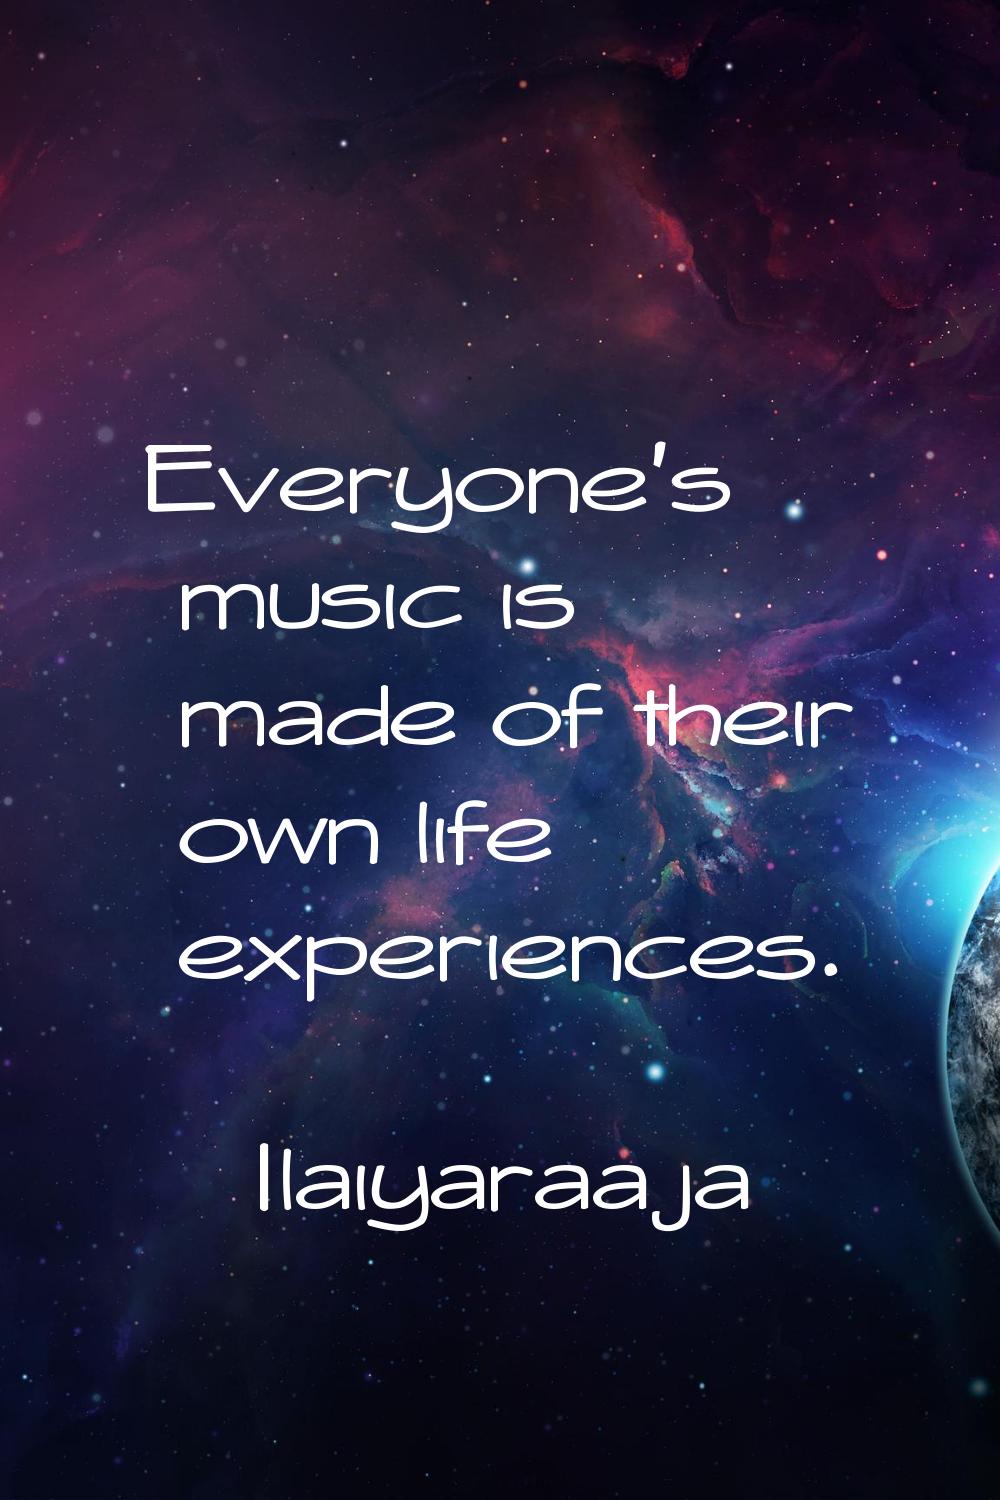 Everyone's music is made of their own life experiences.